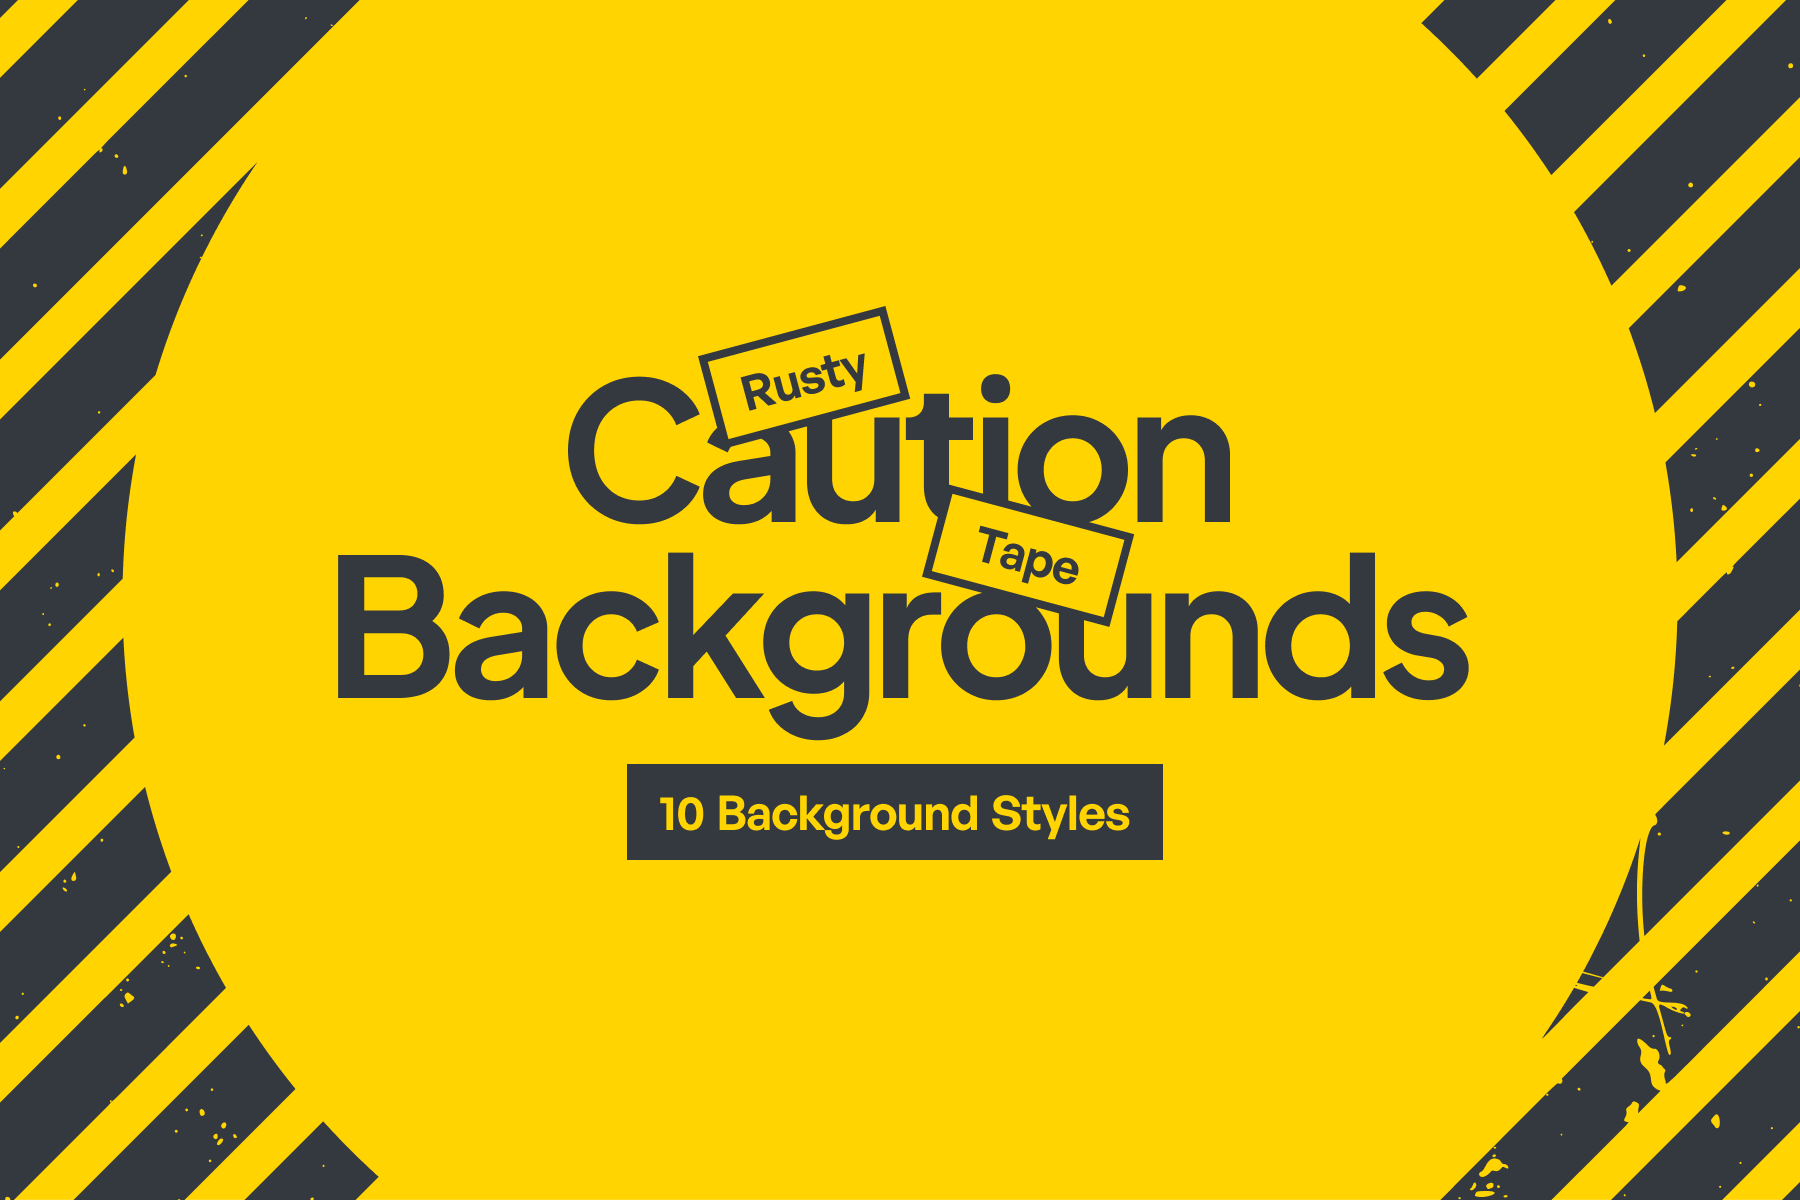 Rusty Caution Tape Style Creative Backgrounds Pack